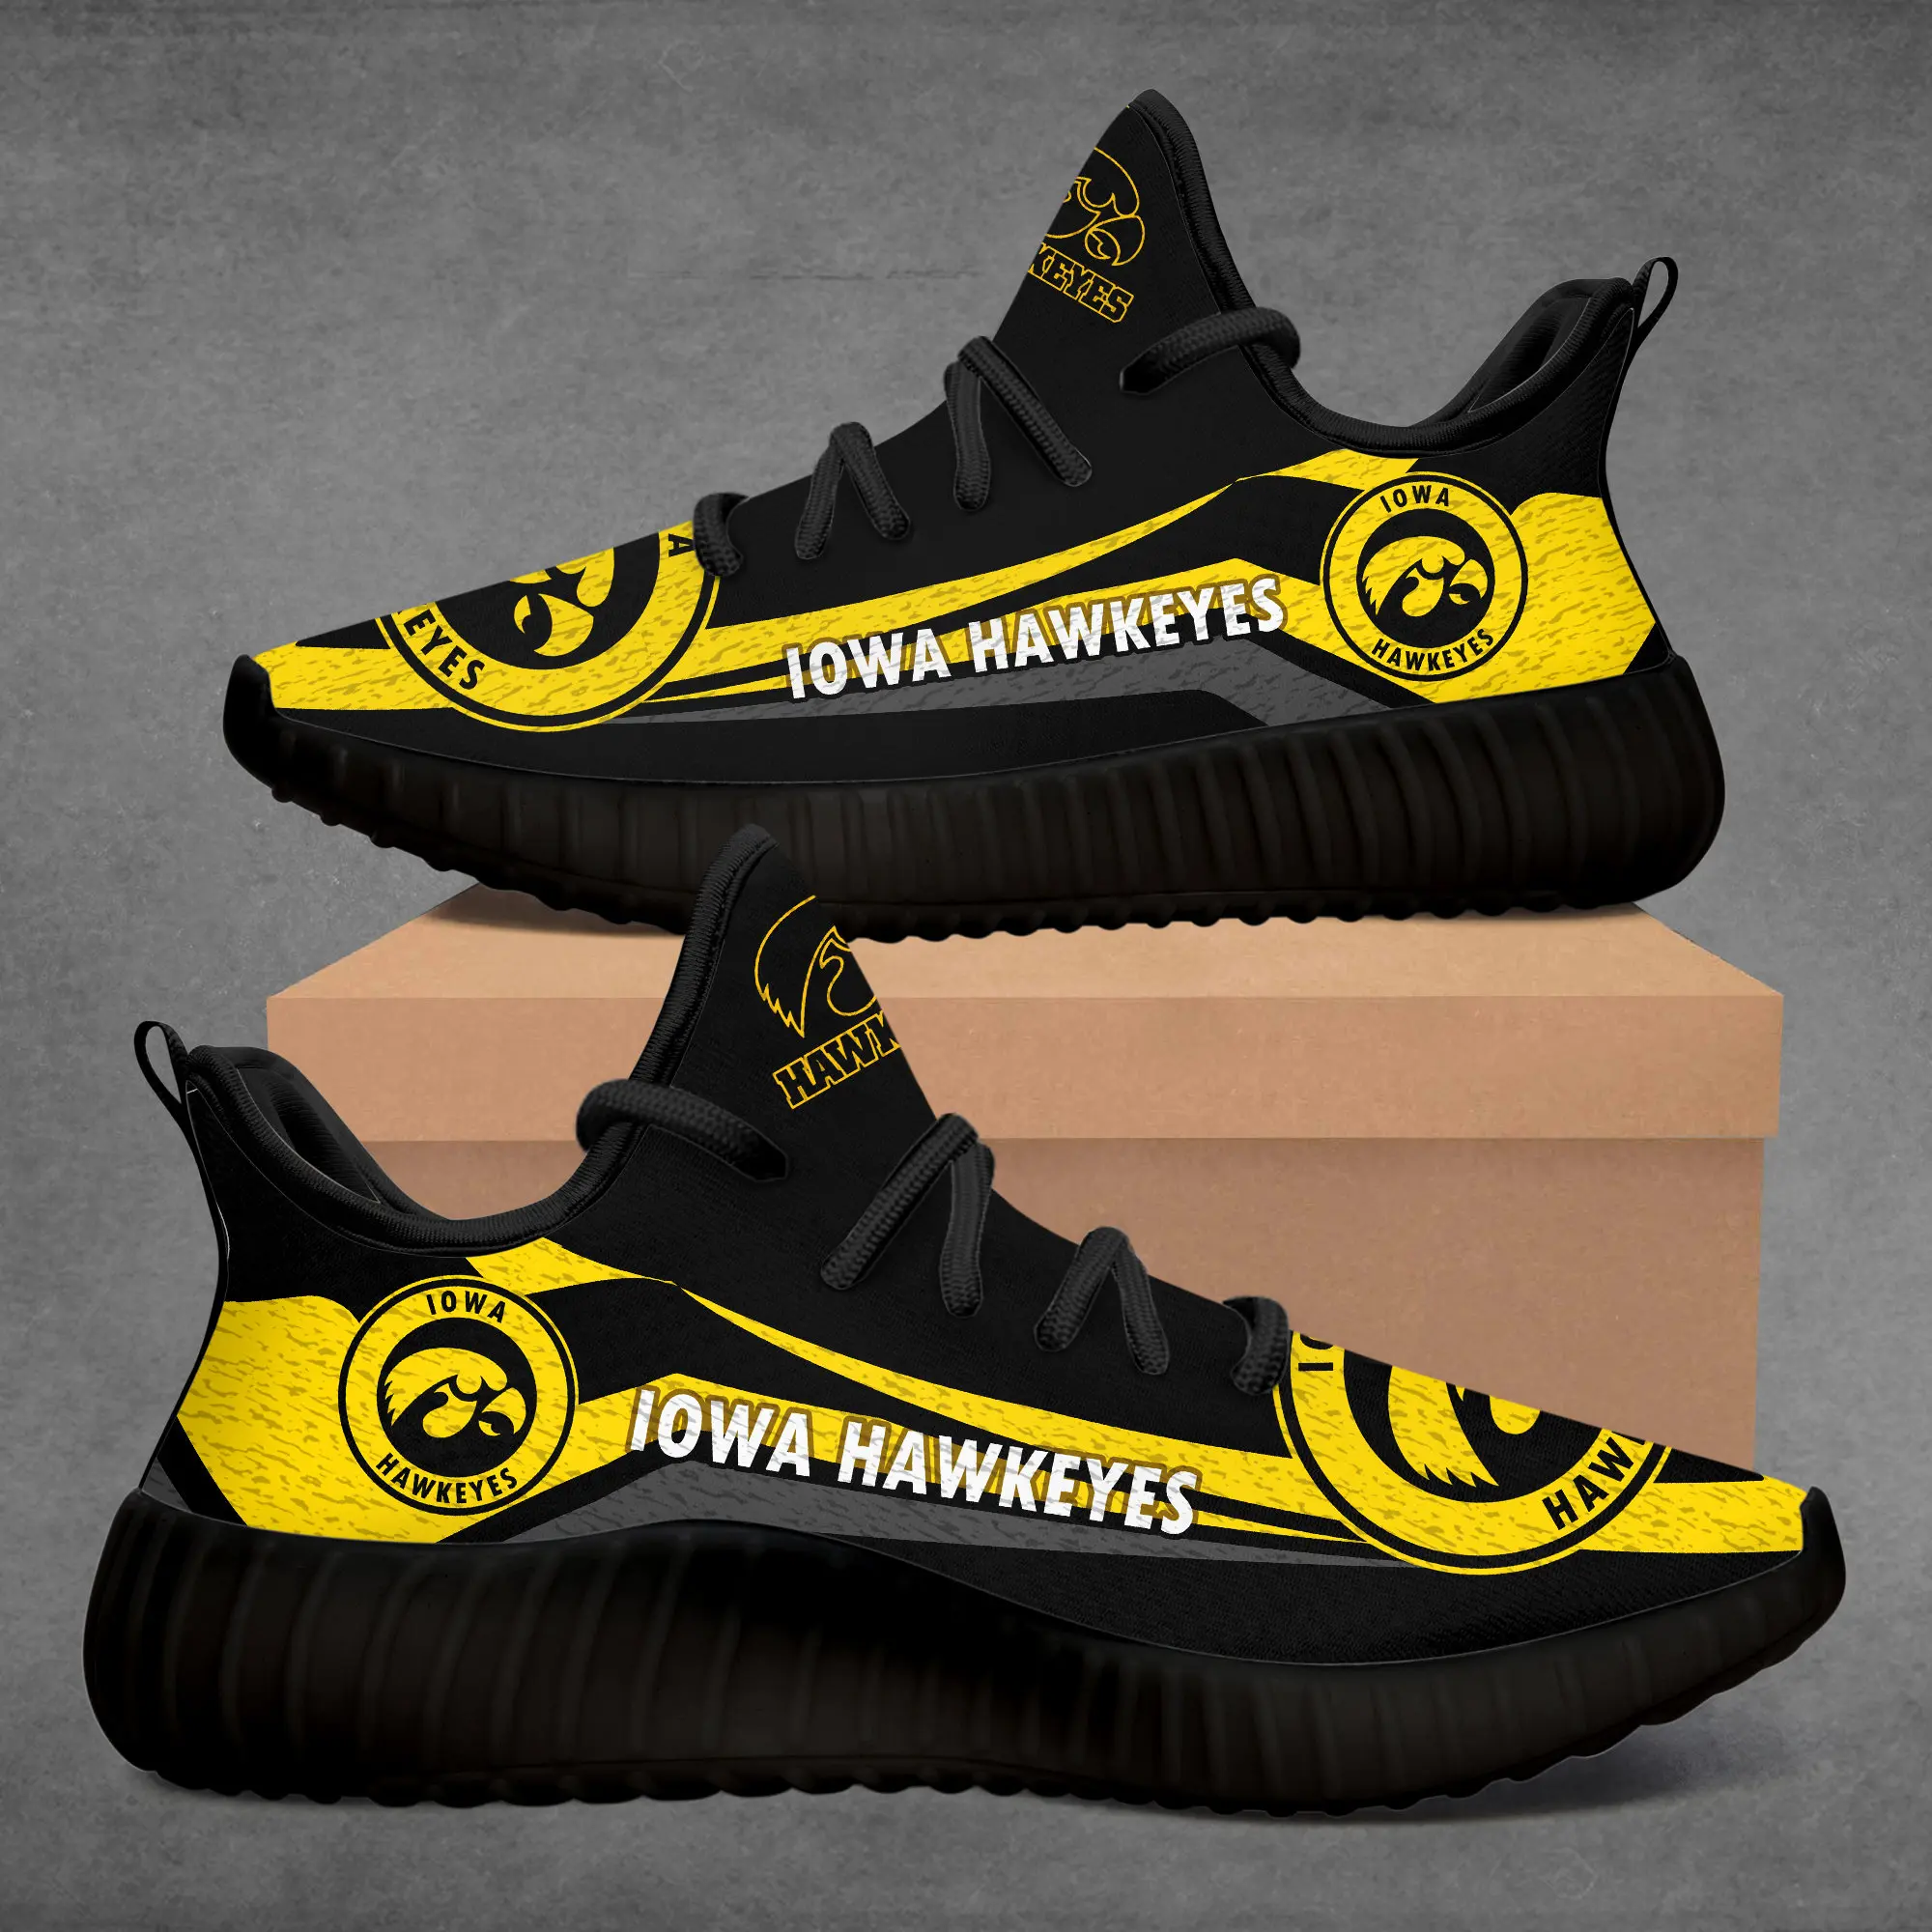 

Custom Diy IOWA-HAWKEYES Women Men Girl Youth Sports Sneakers Running Shoes Handmade Crafted Multi Colored Trainers